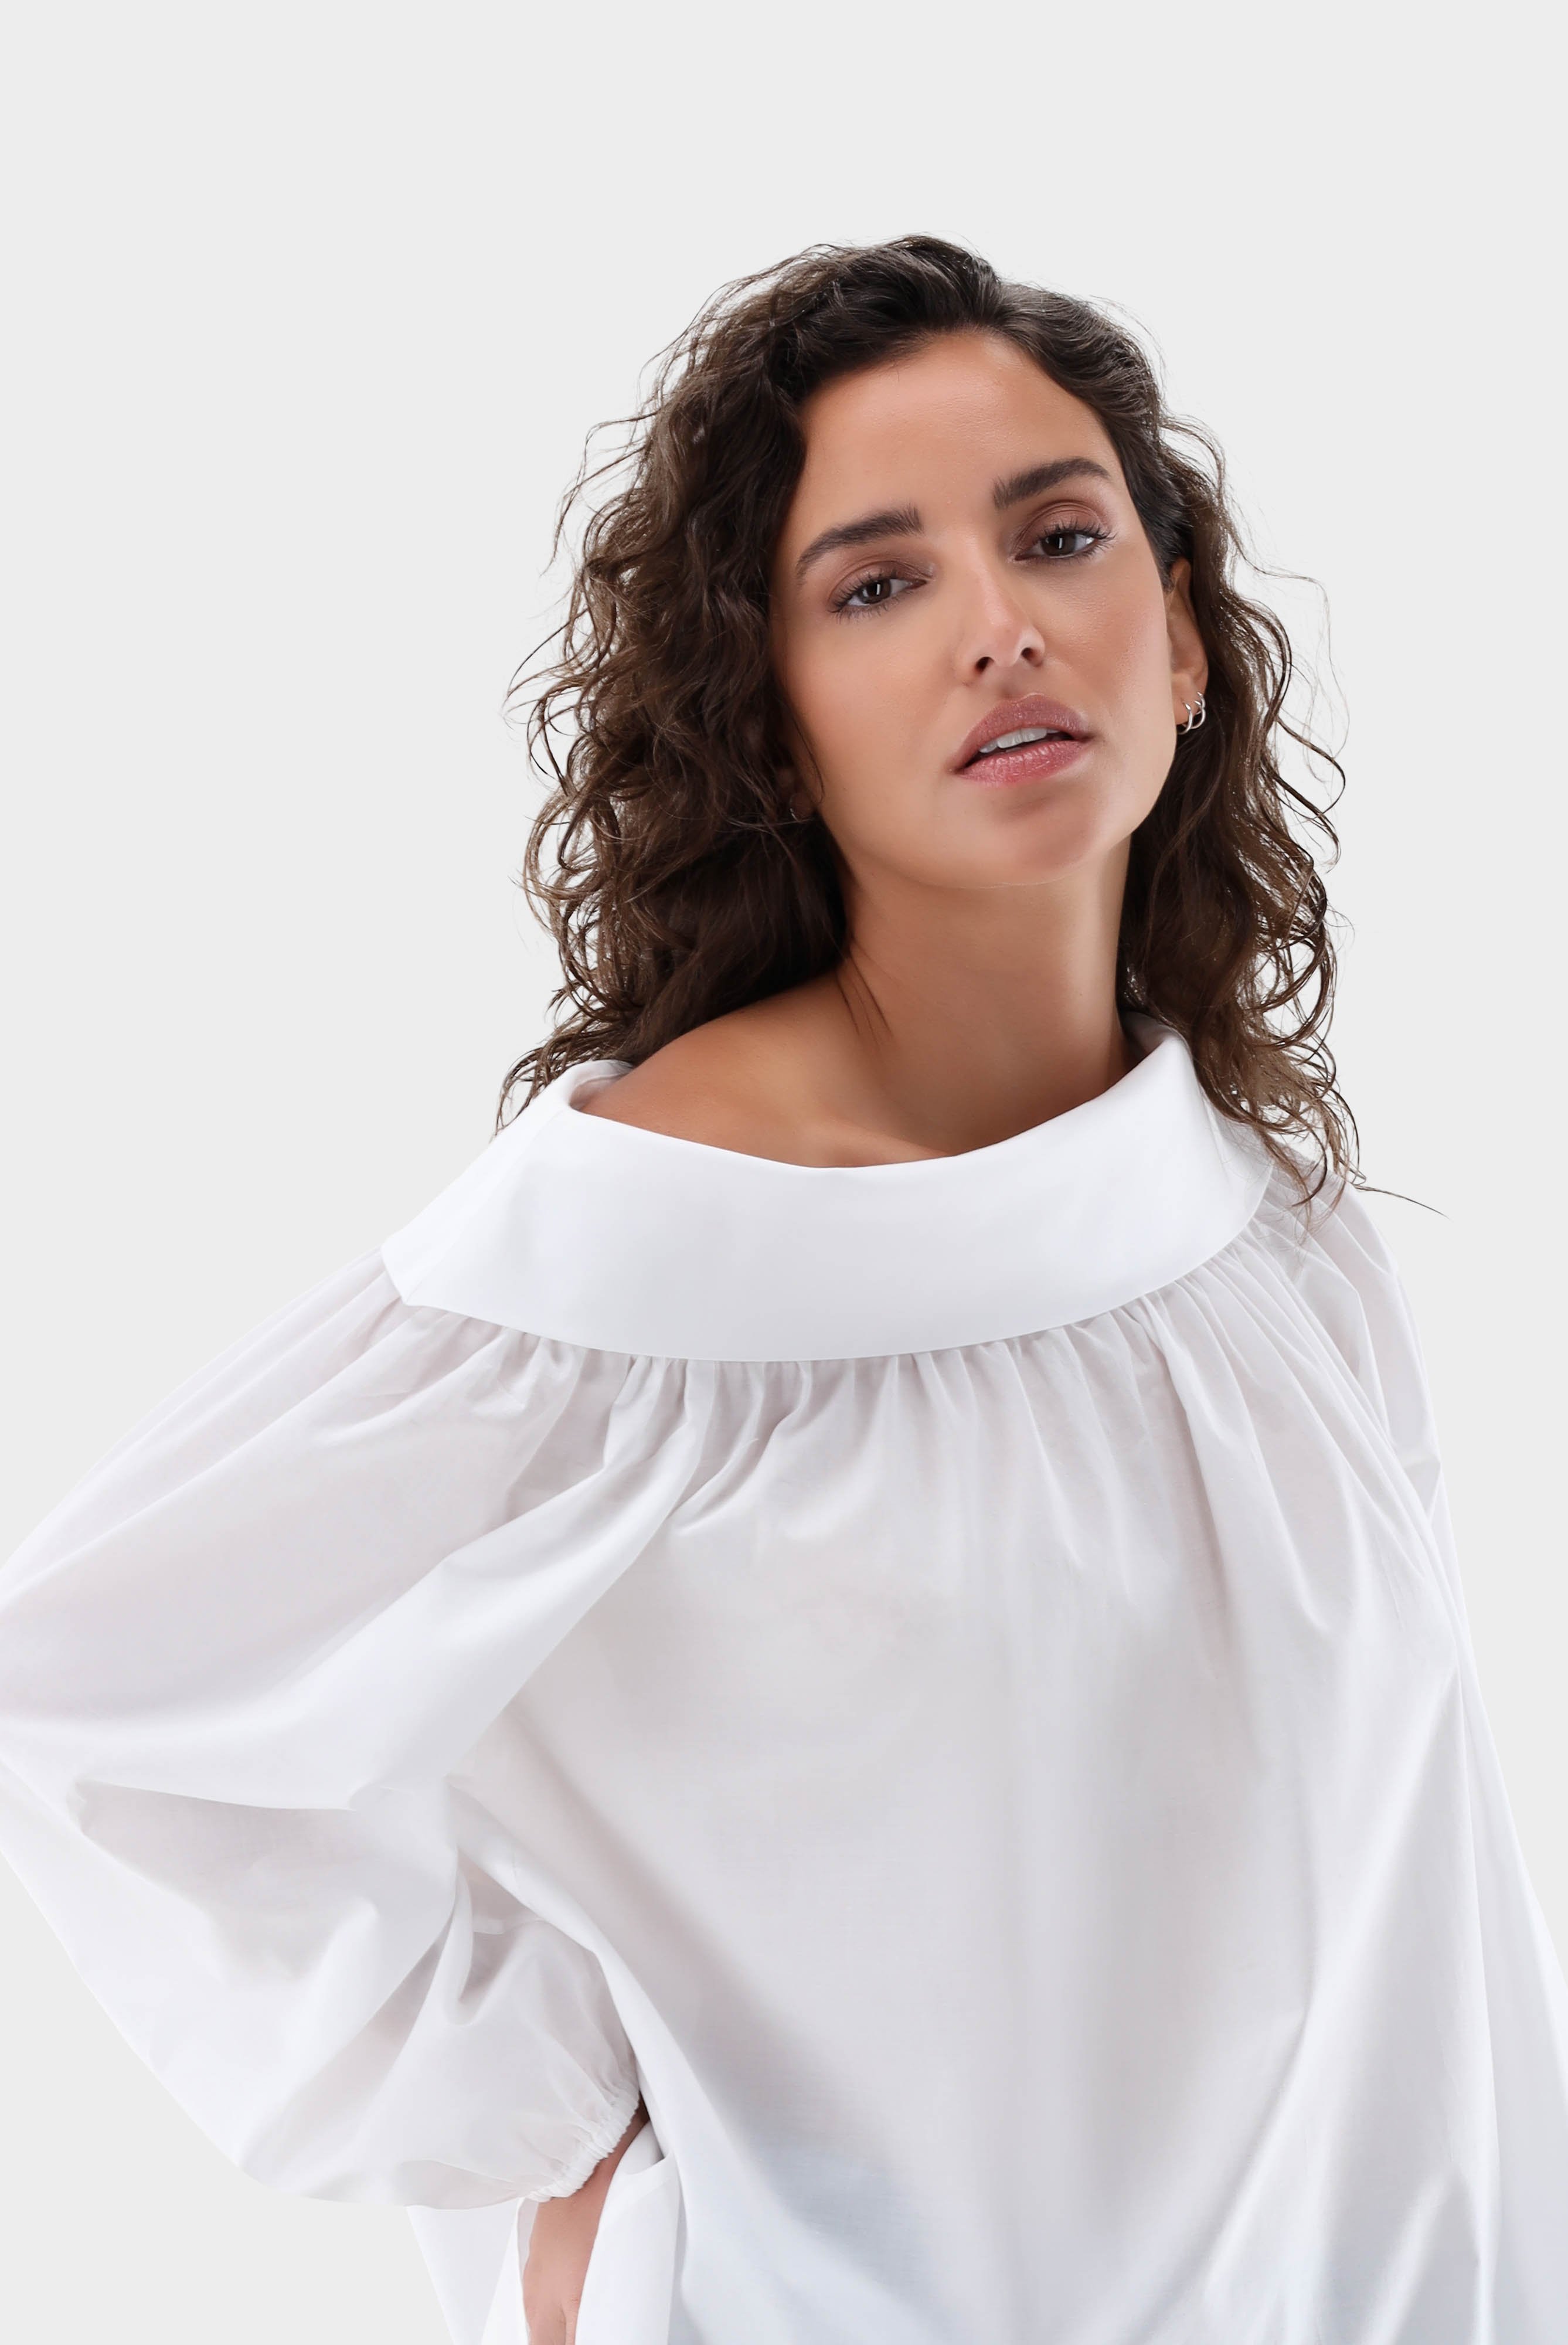 Casual Blouses+One shoulder blouse in cotton batiste+05.528O..160127.000.36